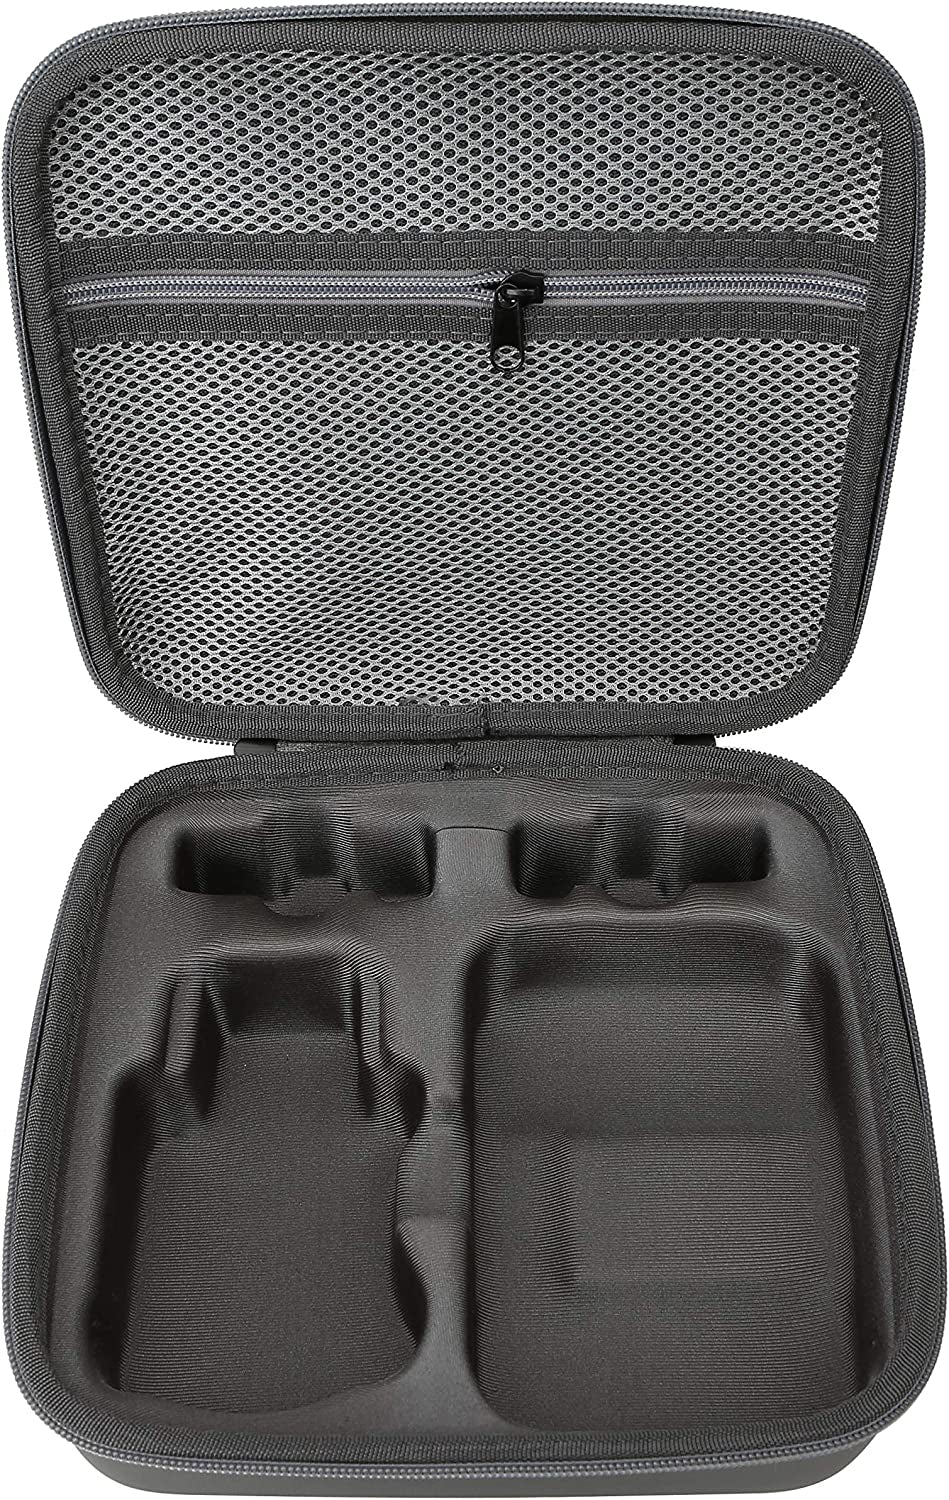 Carrying Case Storage Bag for DJI Mini 2-Newest Mini 2 Drone and